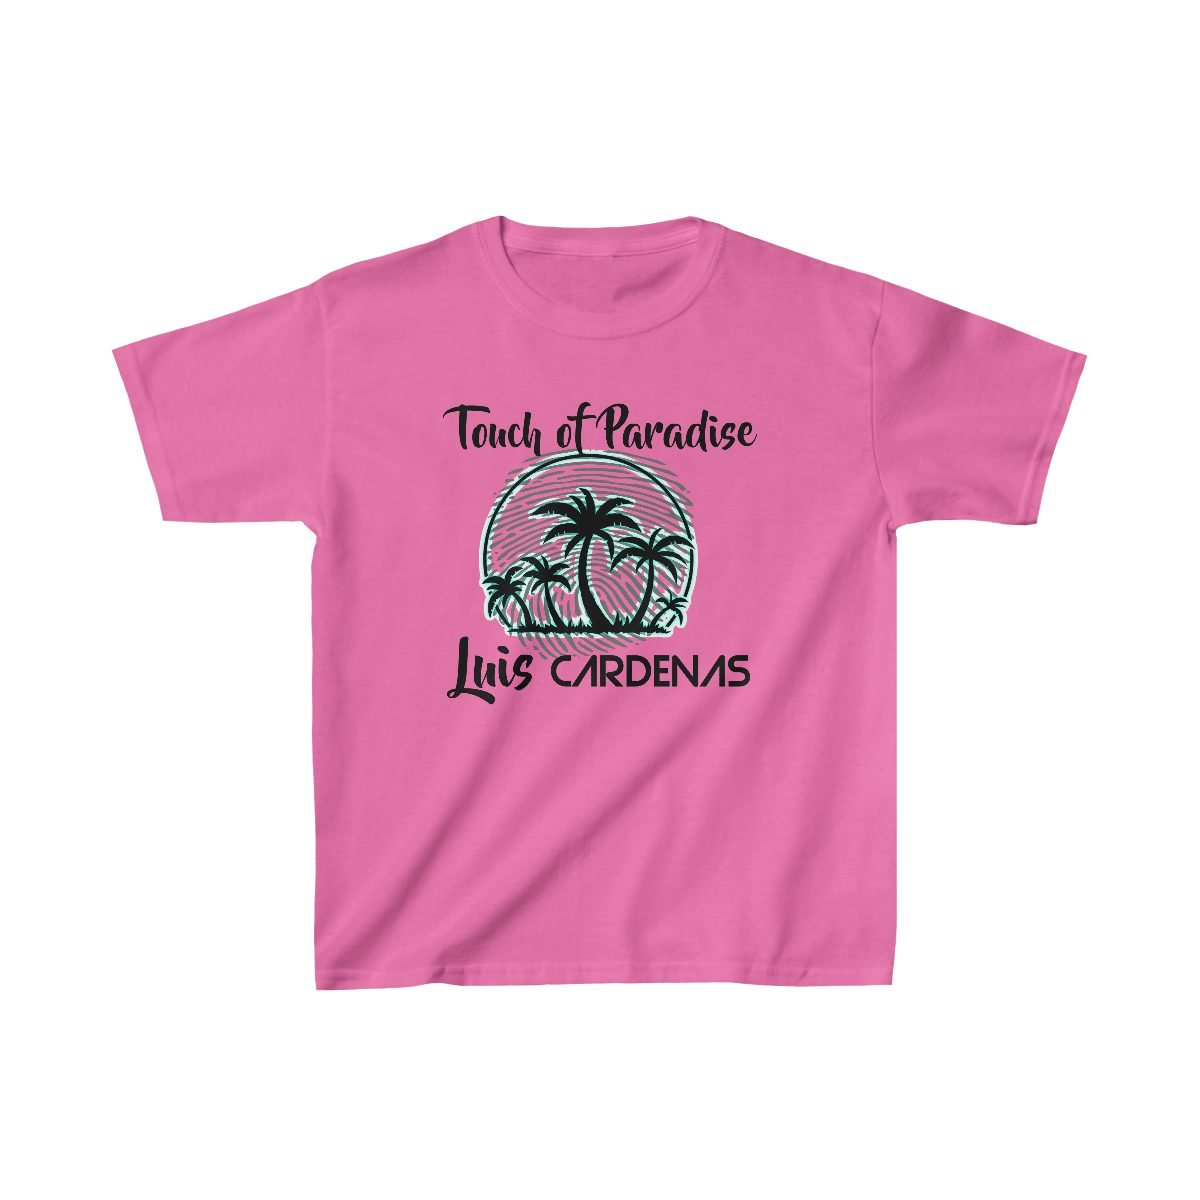 Luis Cardenas – Touch of Paradise Children’s Short Sleeve Tshirt